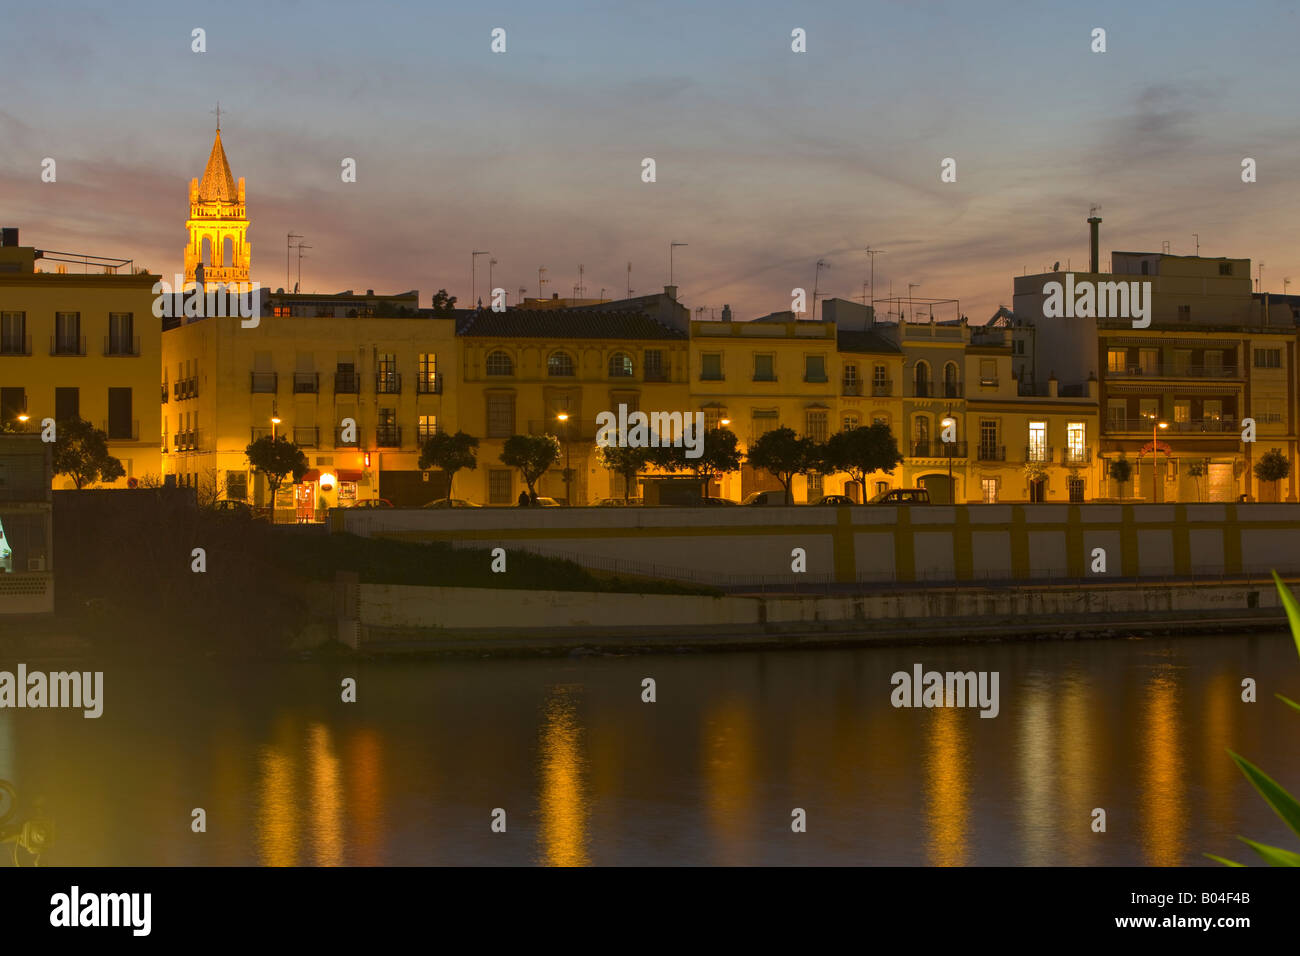 Looking across the Rio Guadalquivir (river) towards the Triana District and the bell tower of Iglesia de Santa Ana at dusk Stock Photo